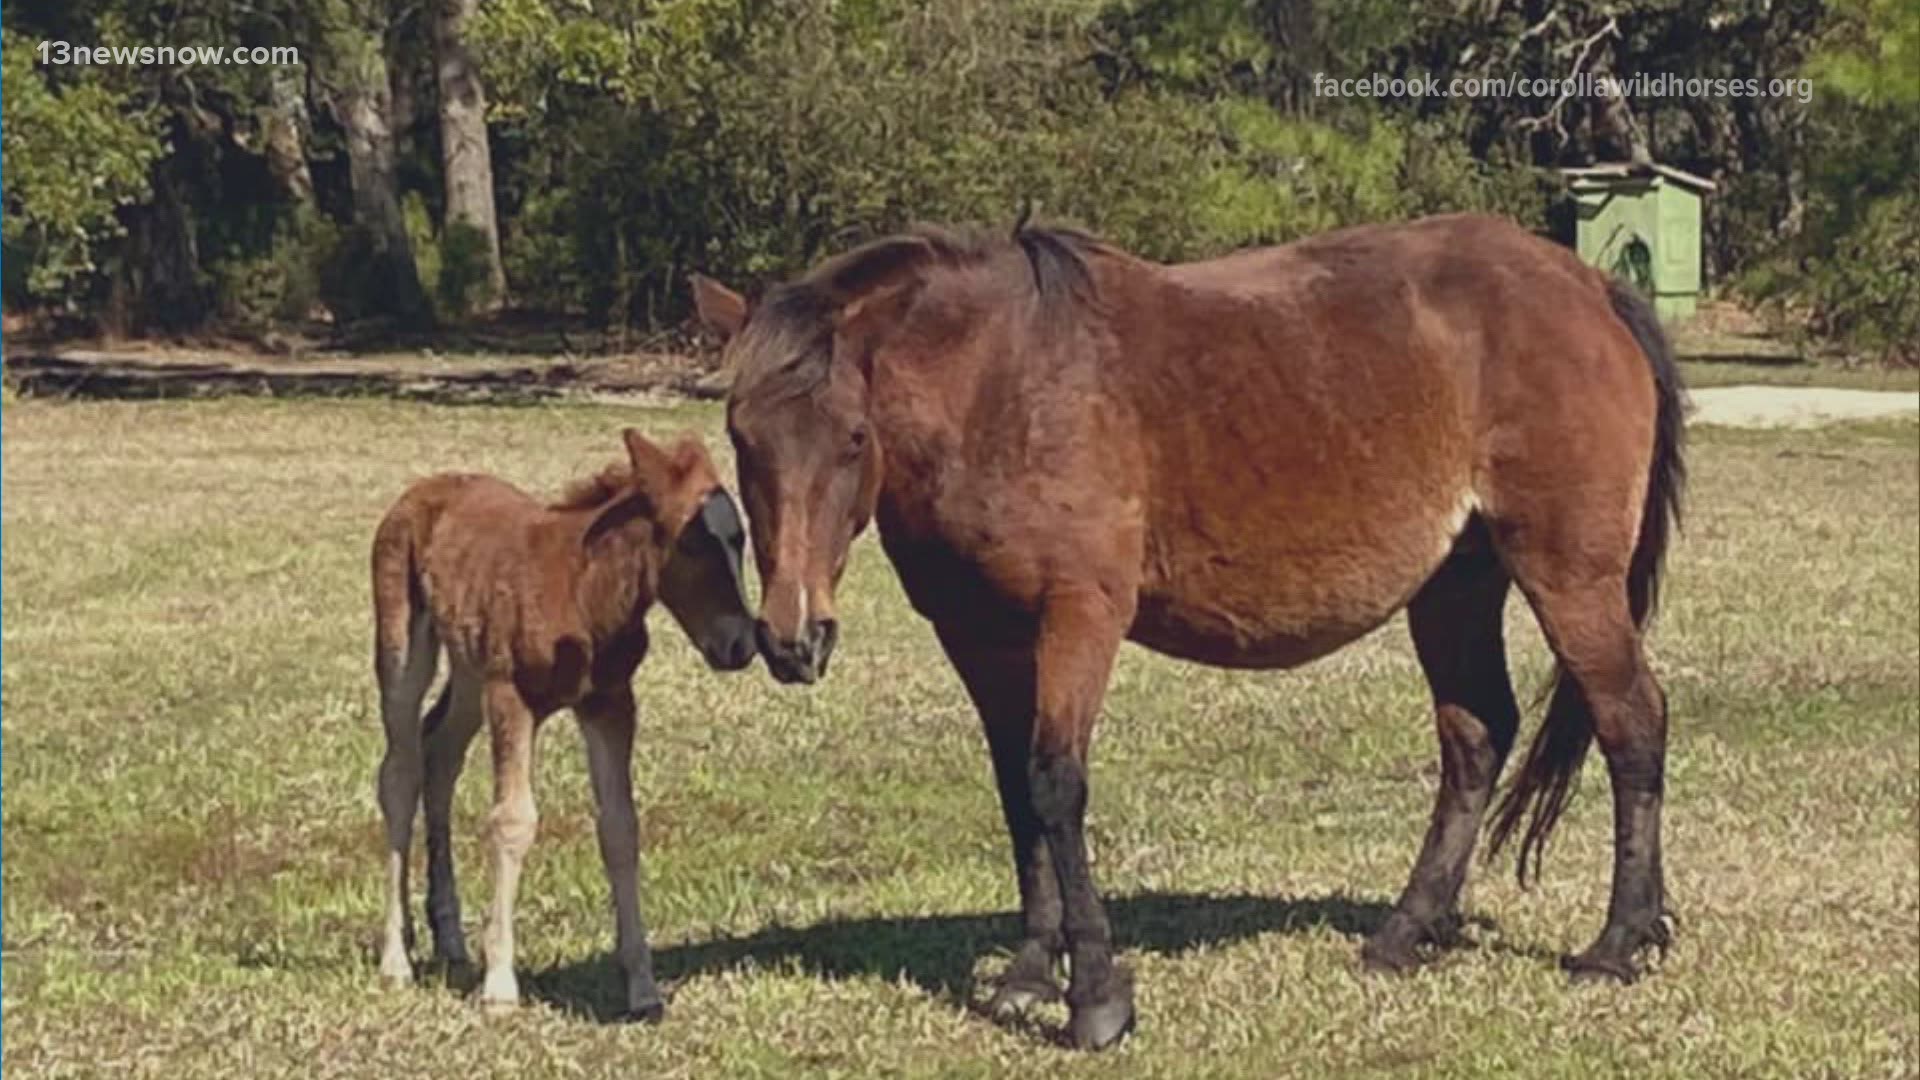 Betsy is the third foal born in 2021 - so far, all the herd's babies appear healthy. If you see the wild horses on the Outer Banks, do not approach them.